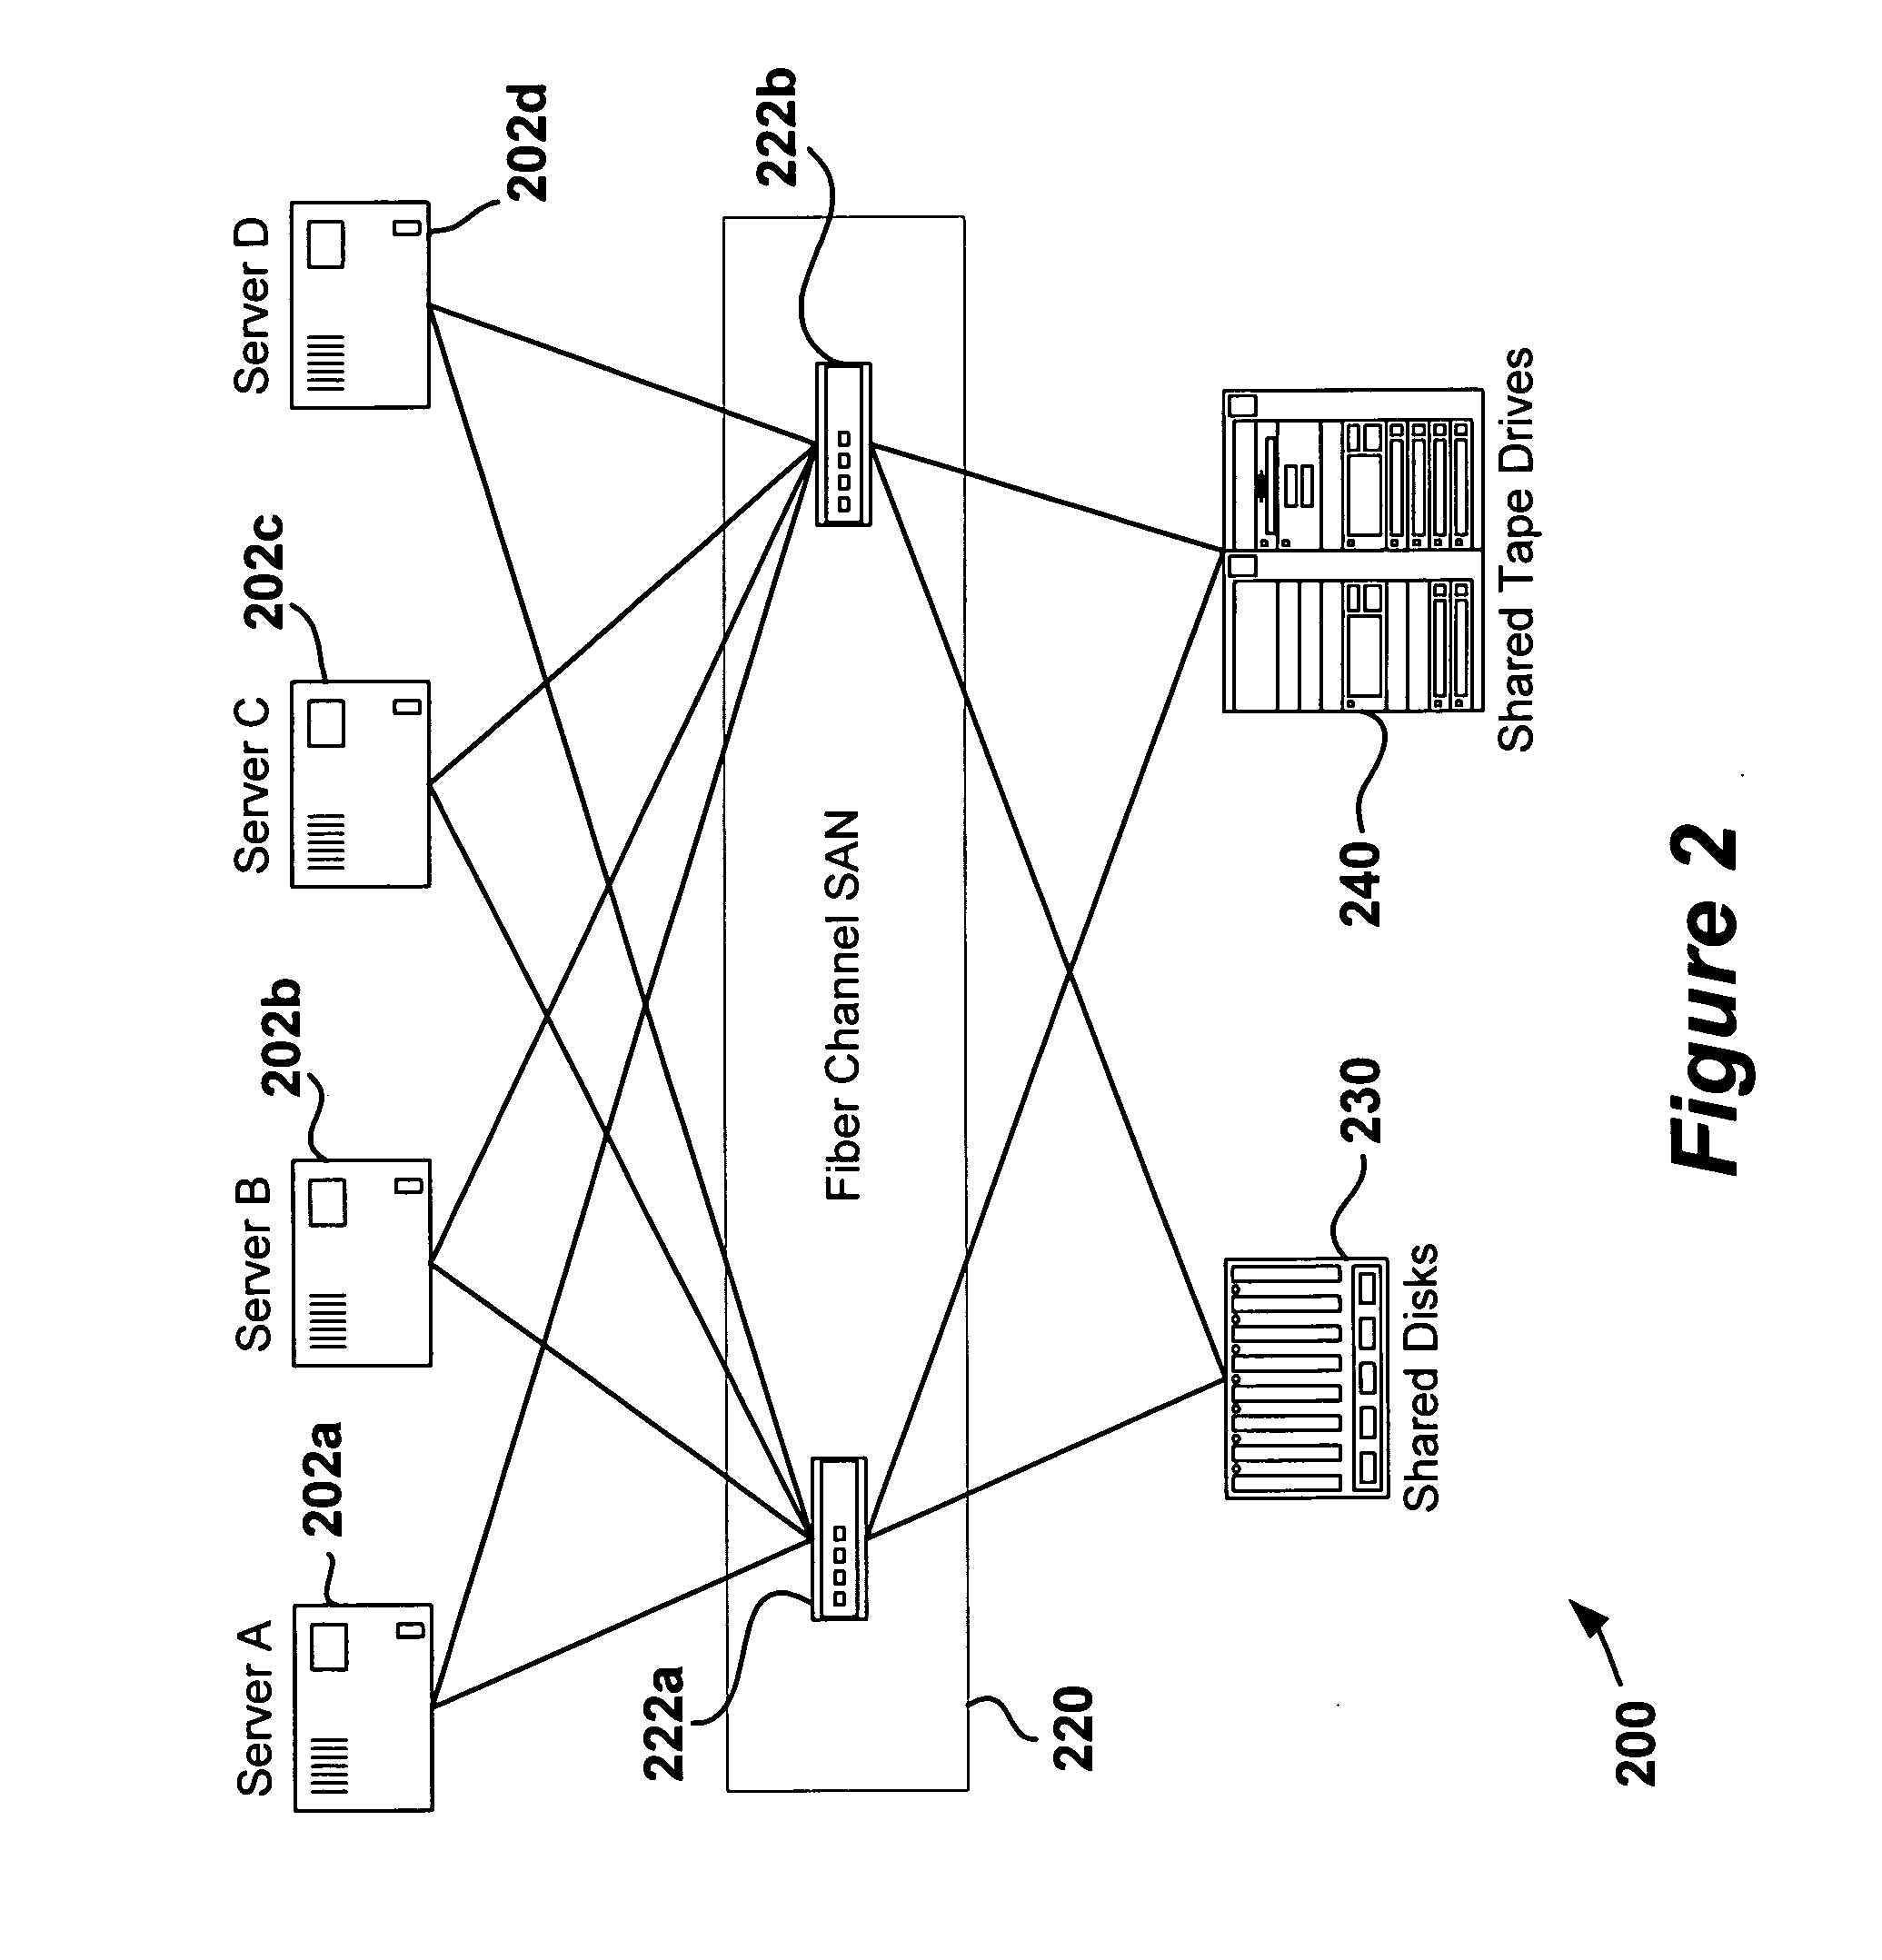 Distributed failover aware storage area network backup of application data in an active-N high availability cluster